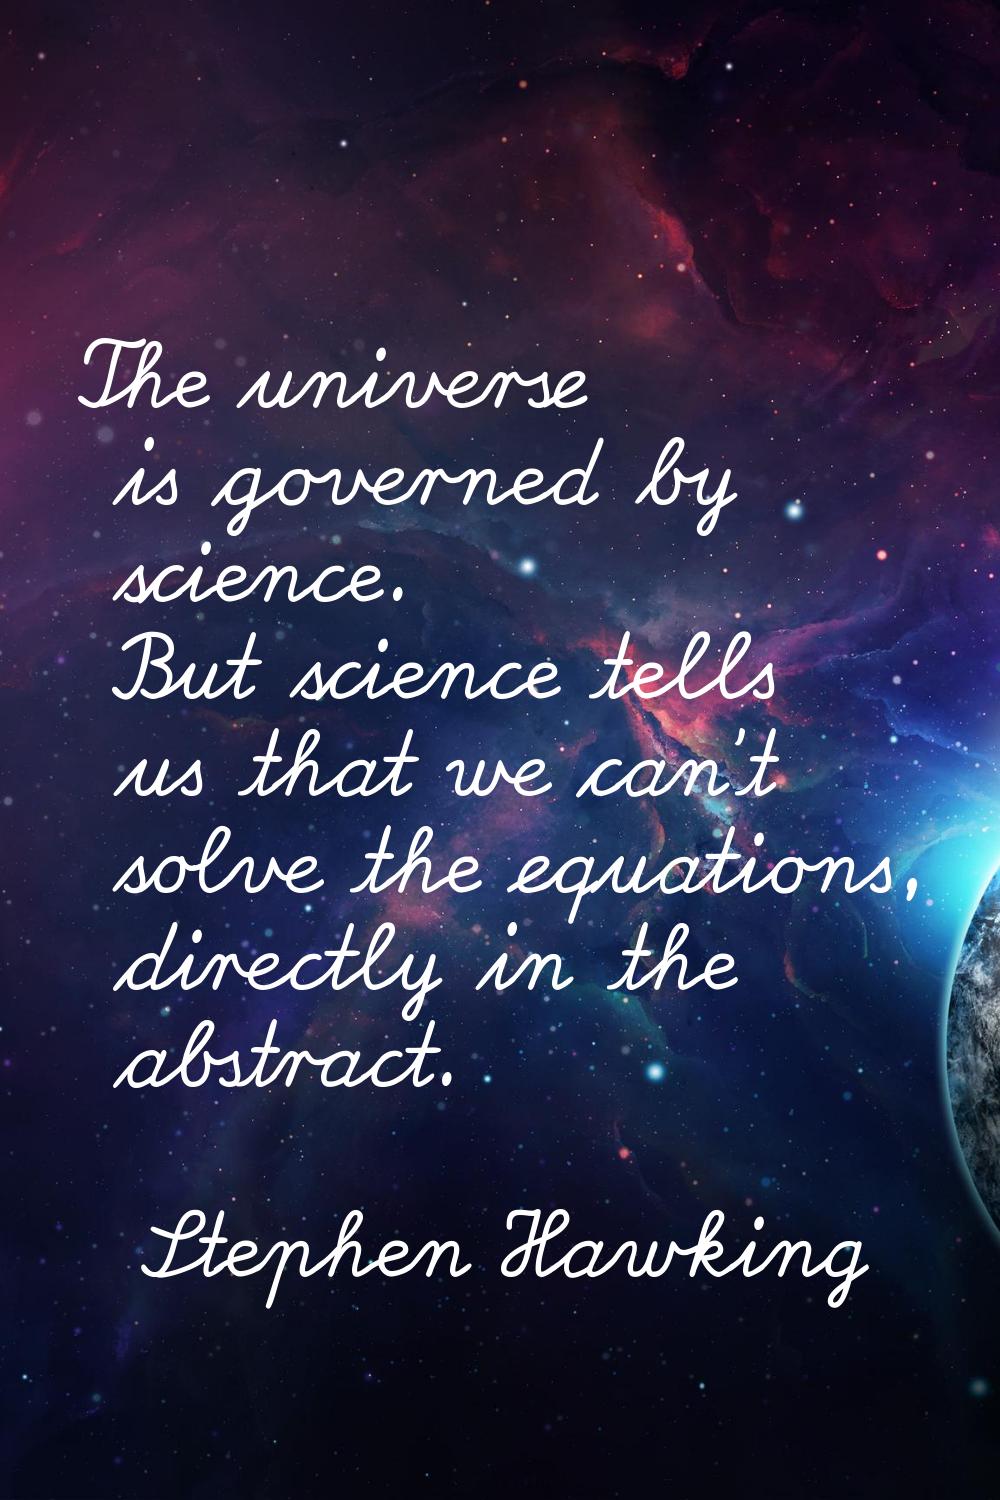 The universe is governed by science. But science tells us that we can't solve the equations, direct